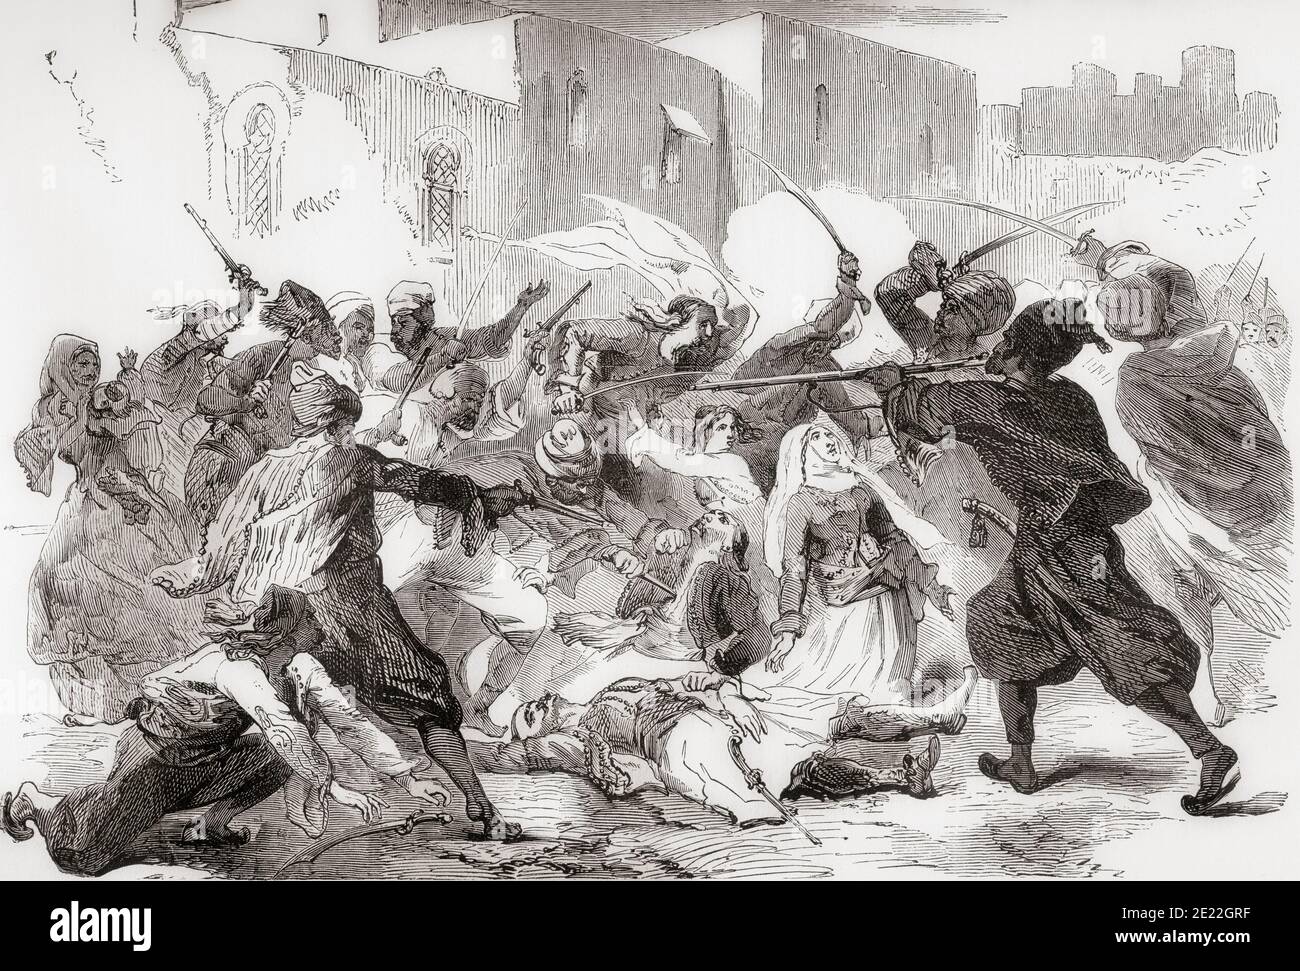 The massacre of Muslims by Christian soldiers during the Russo-Turkish War (1877–1878).  From Russes et Turcs, La Guerre D'Orient, published 1878 Stock Photo